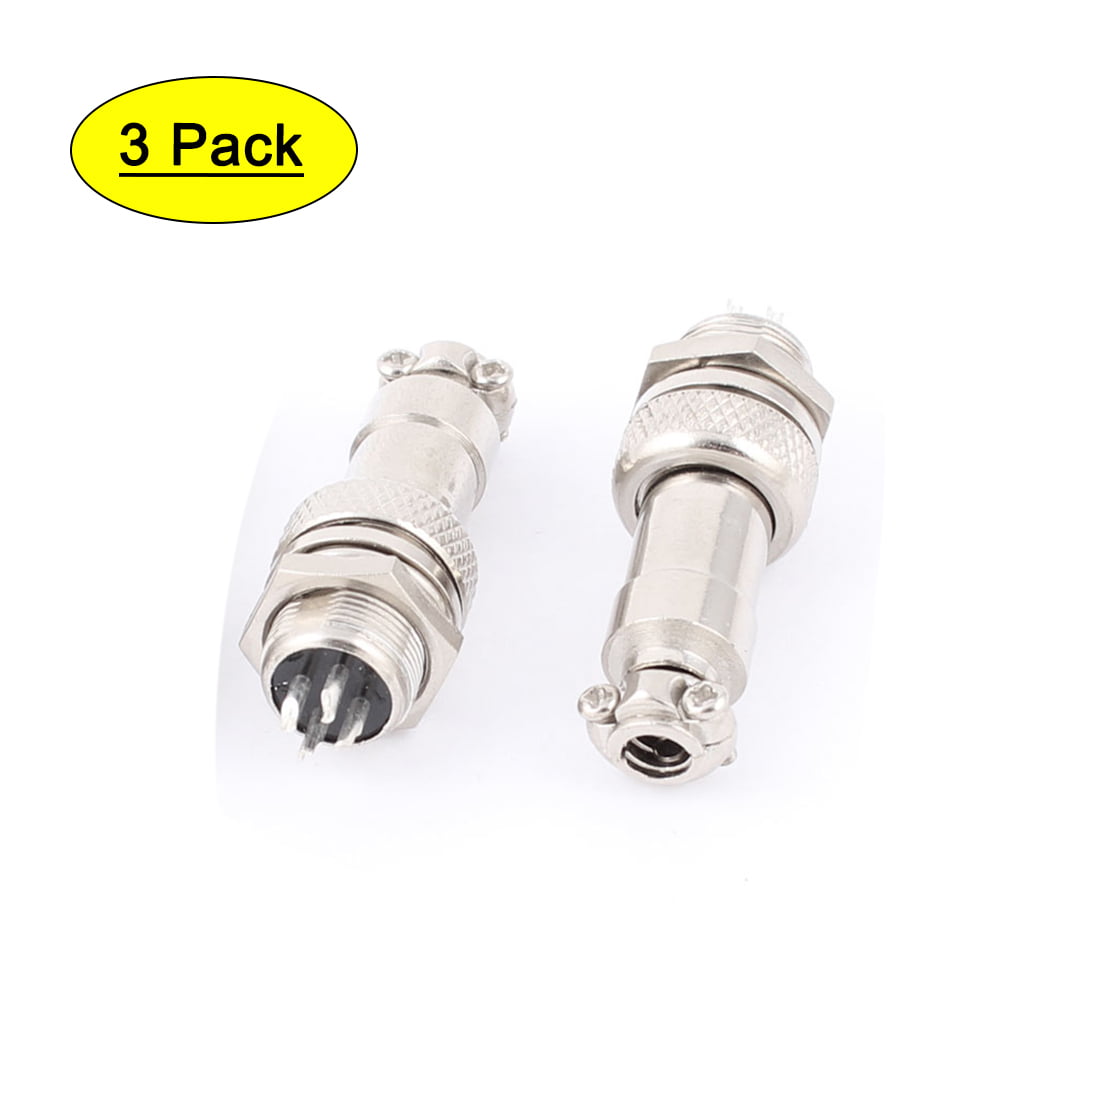 100PCS 12mm Male and Female Metal Aviation Plug GX12-6Core Socket Connector 